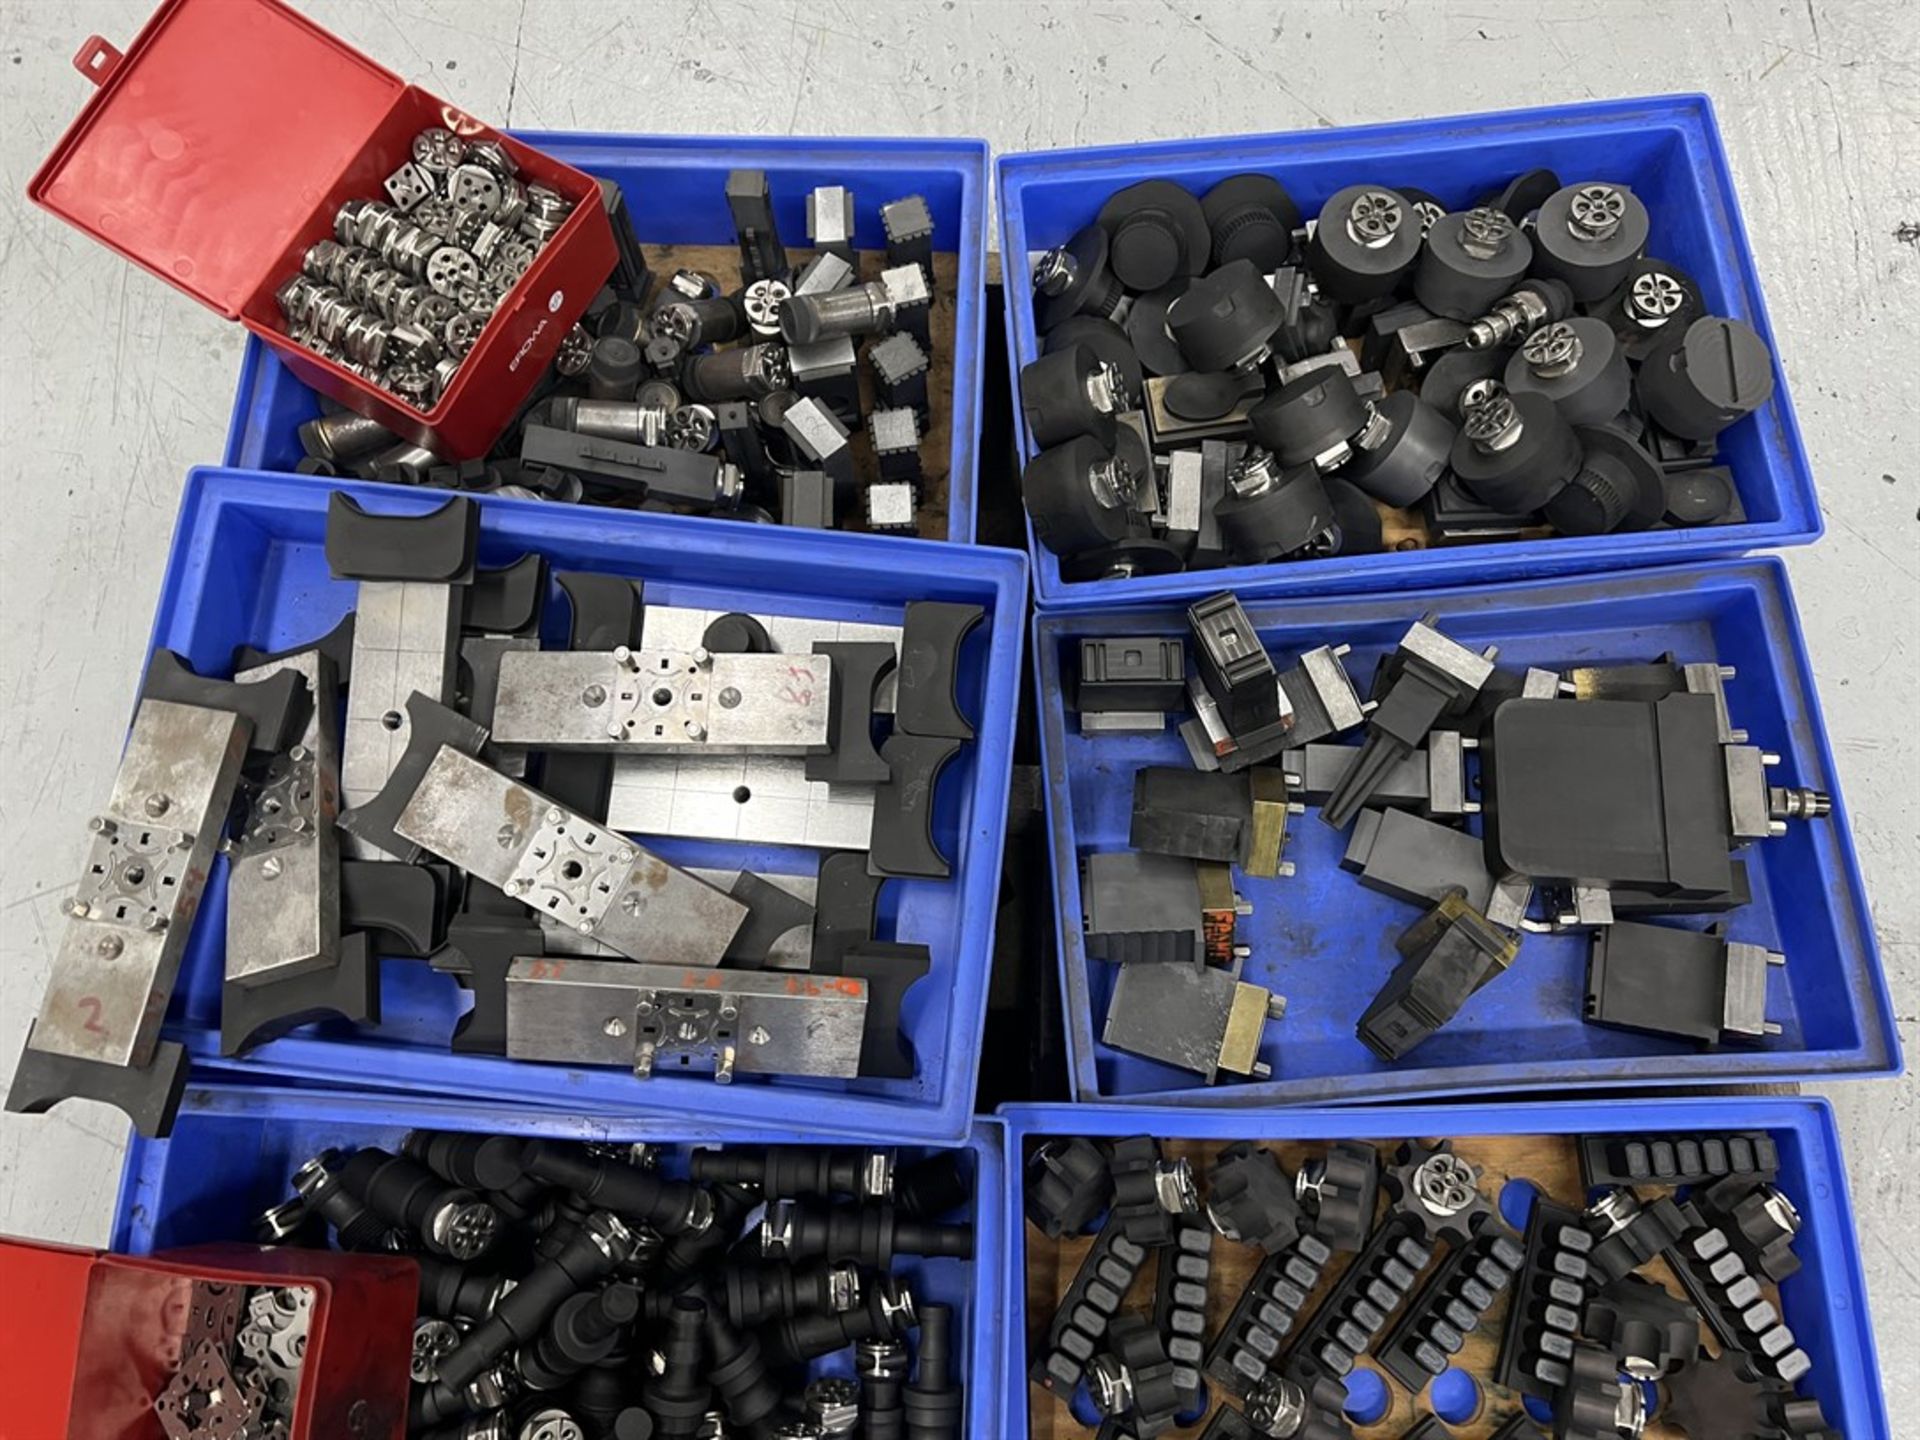 Pallet of Assorted EROWA EDM Tooling, Fixtures, and Electrodes - Image 4 of 4